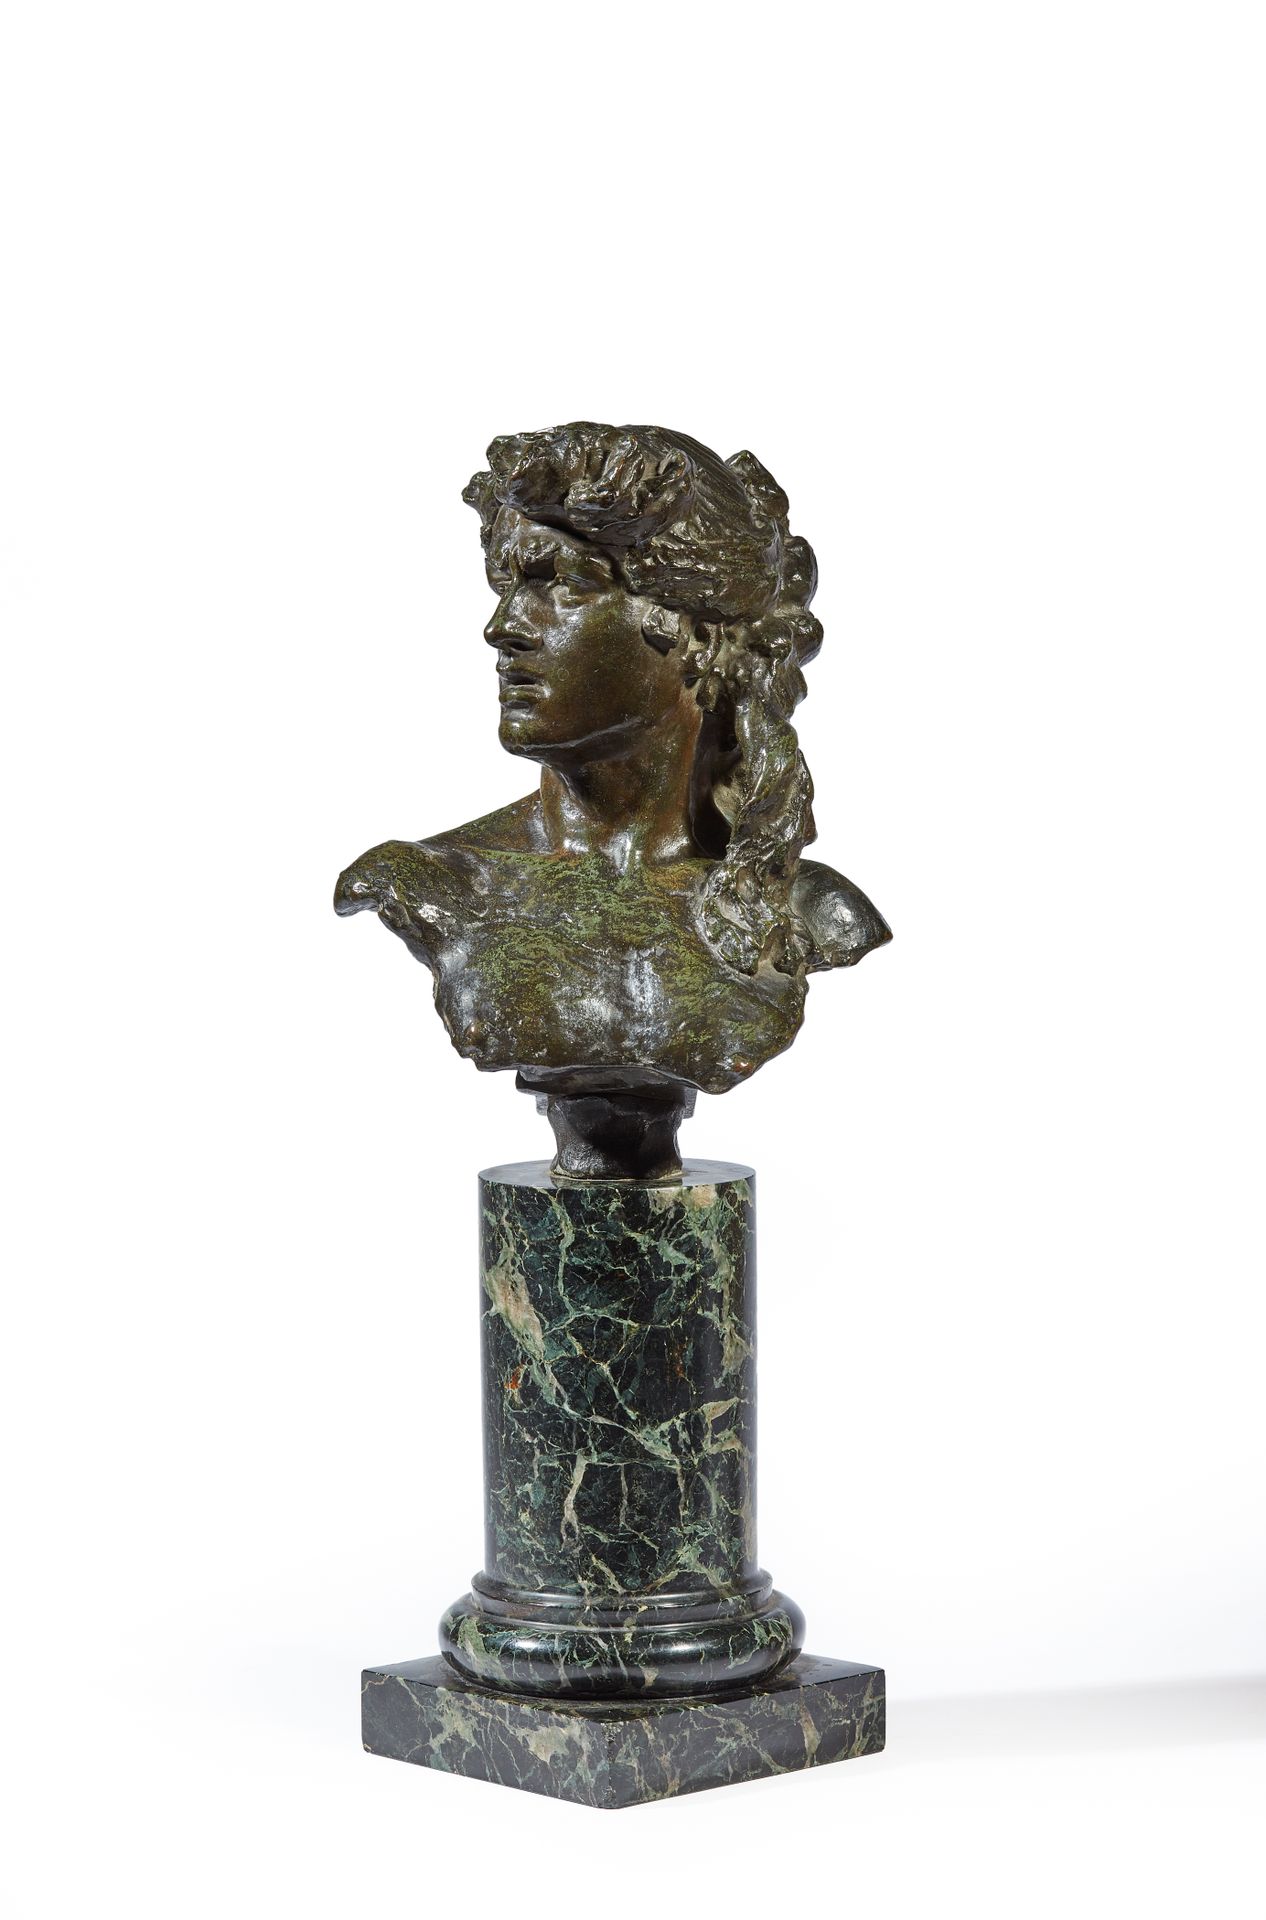 Null Jacques FROMENT-MEURICE (1864-1910)

Bust of a woman

Proof in bronze with &hellip;